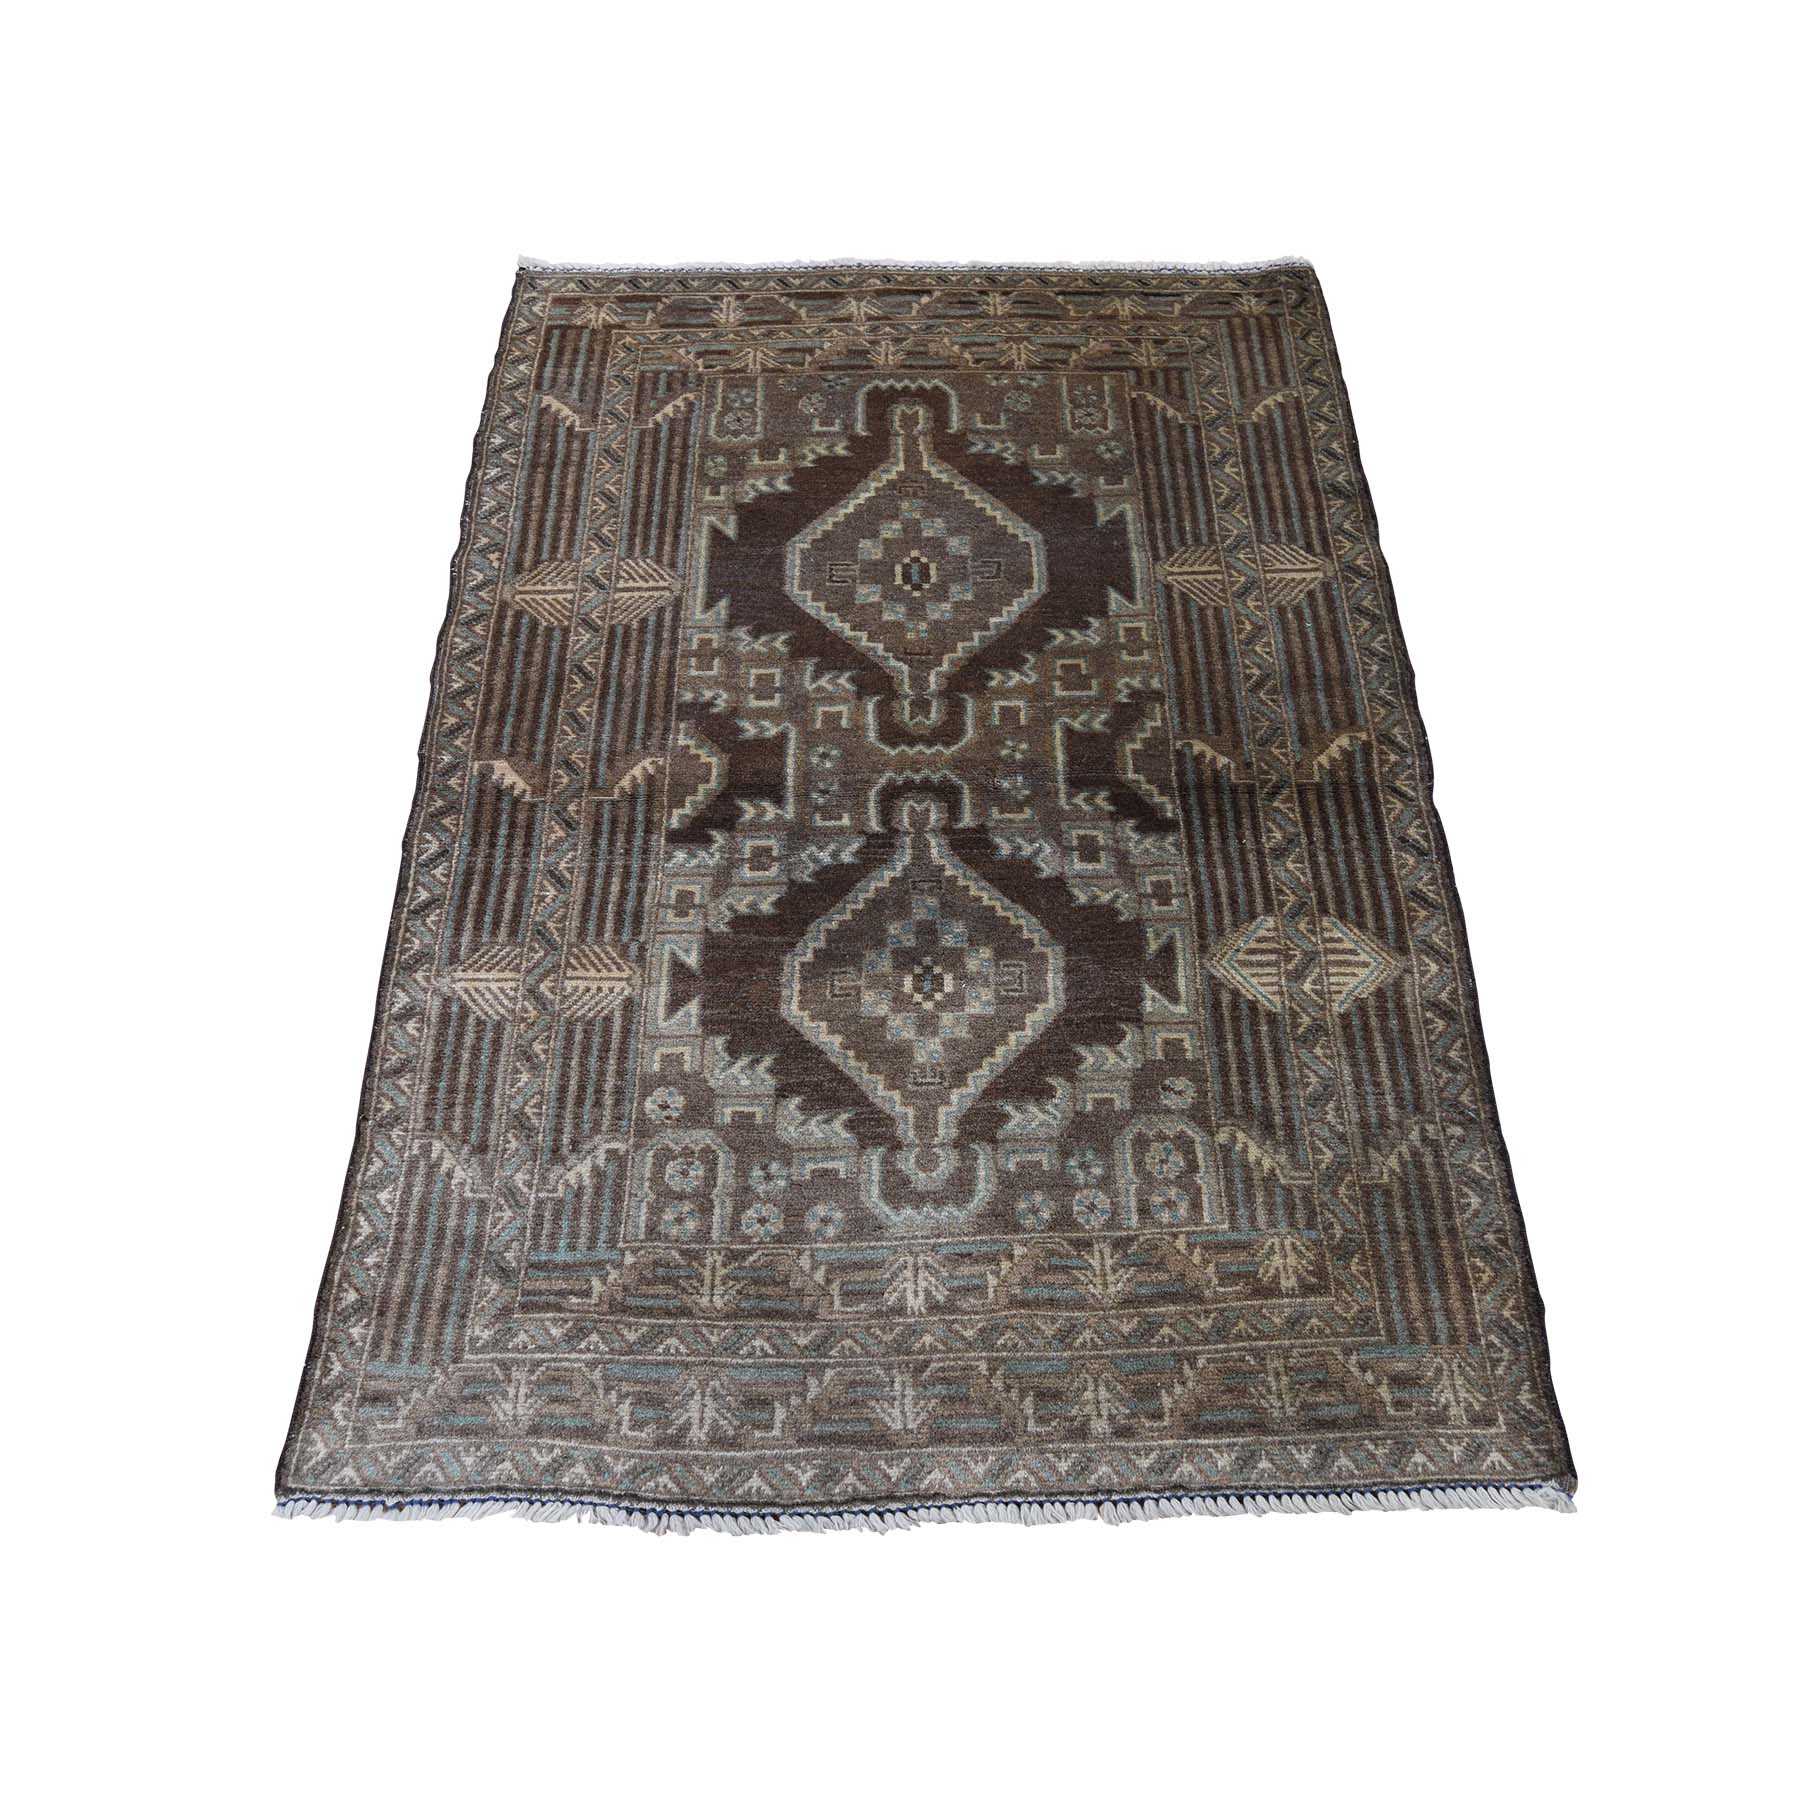 2'8"X4'2" Vintage Afghan Baluch Natural Colors Hand-Knotted Pure Wool Oriental Rug moaddd98